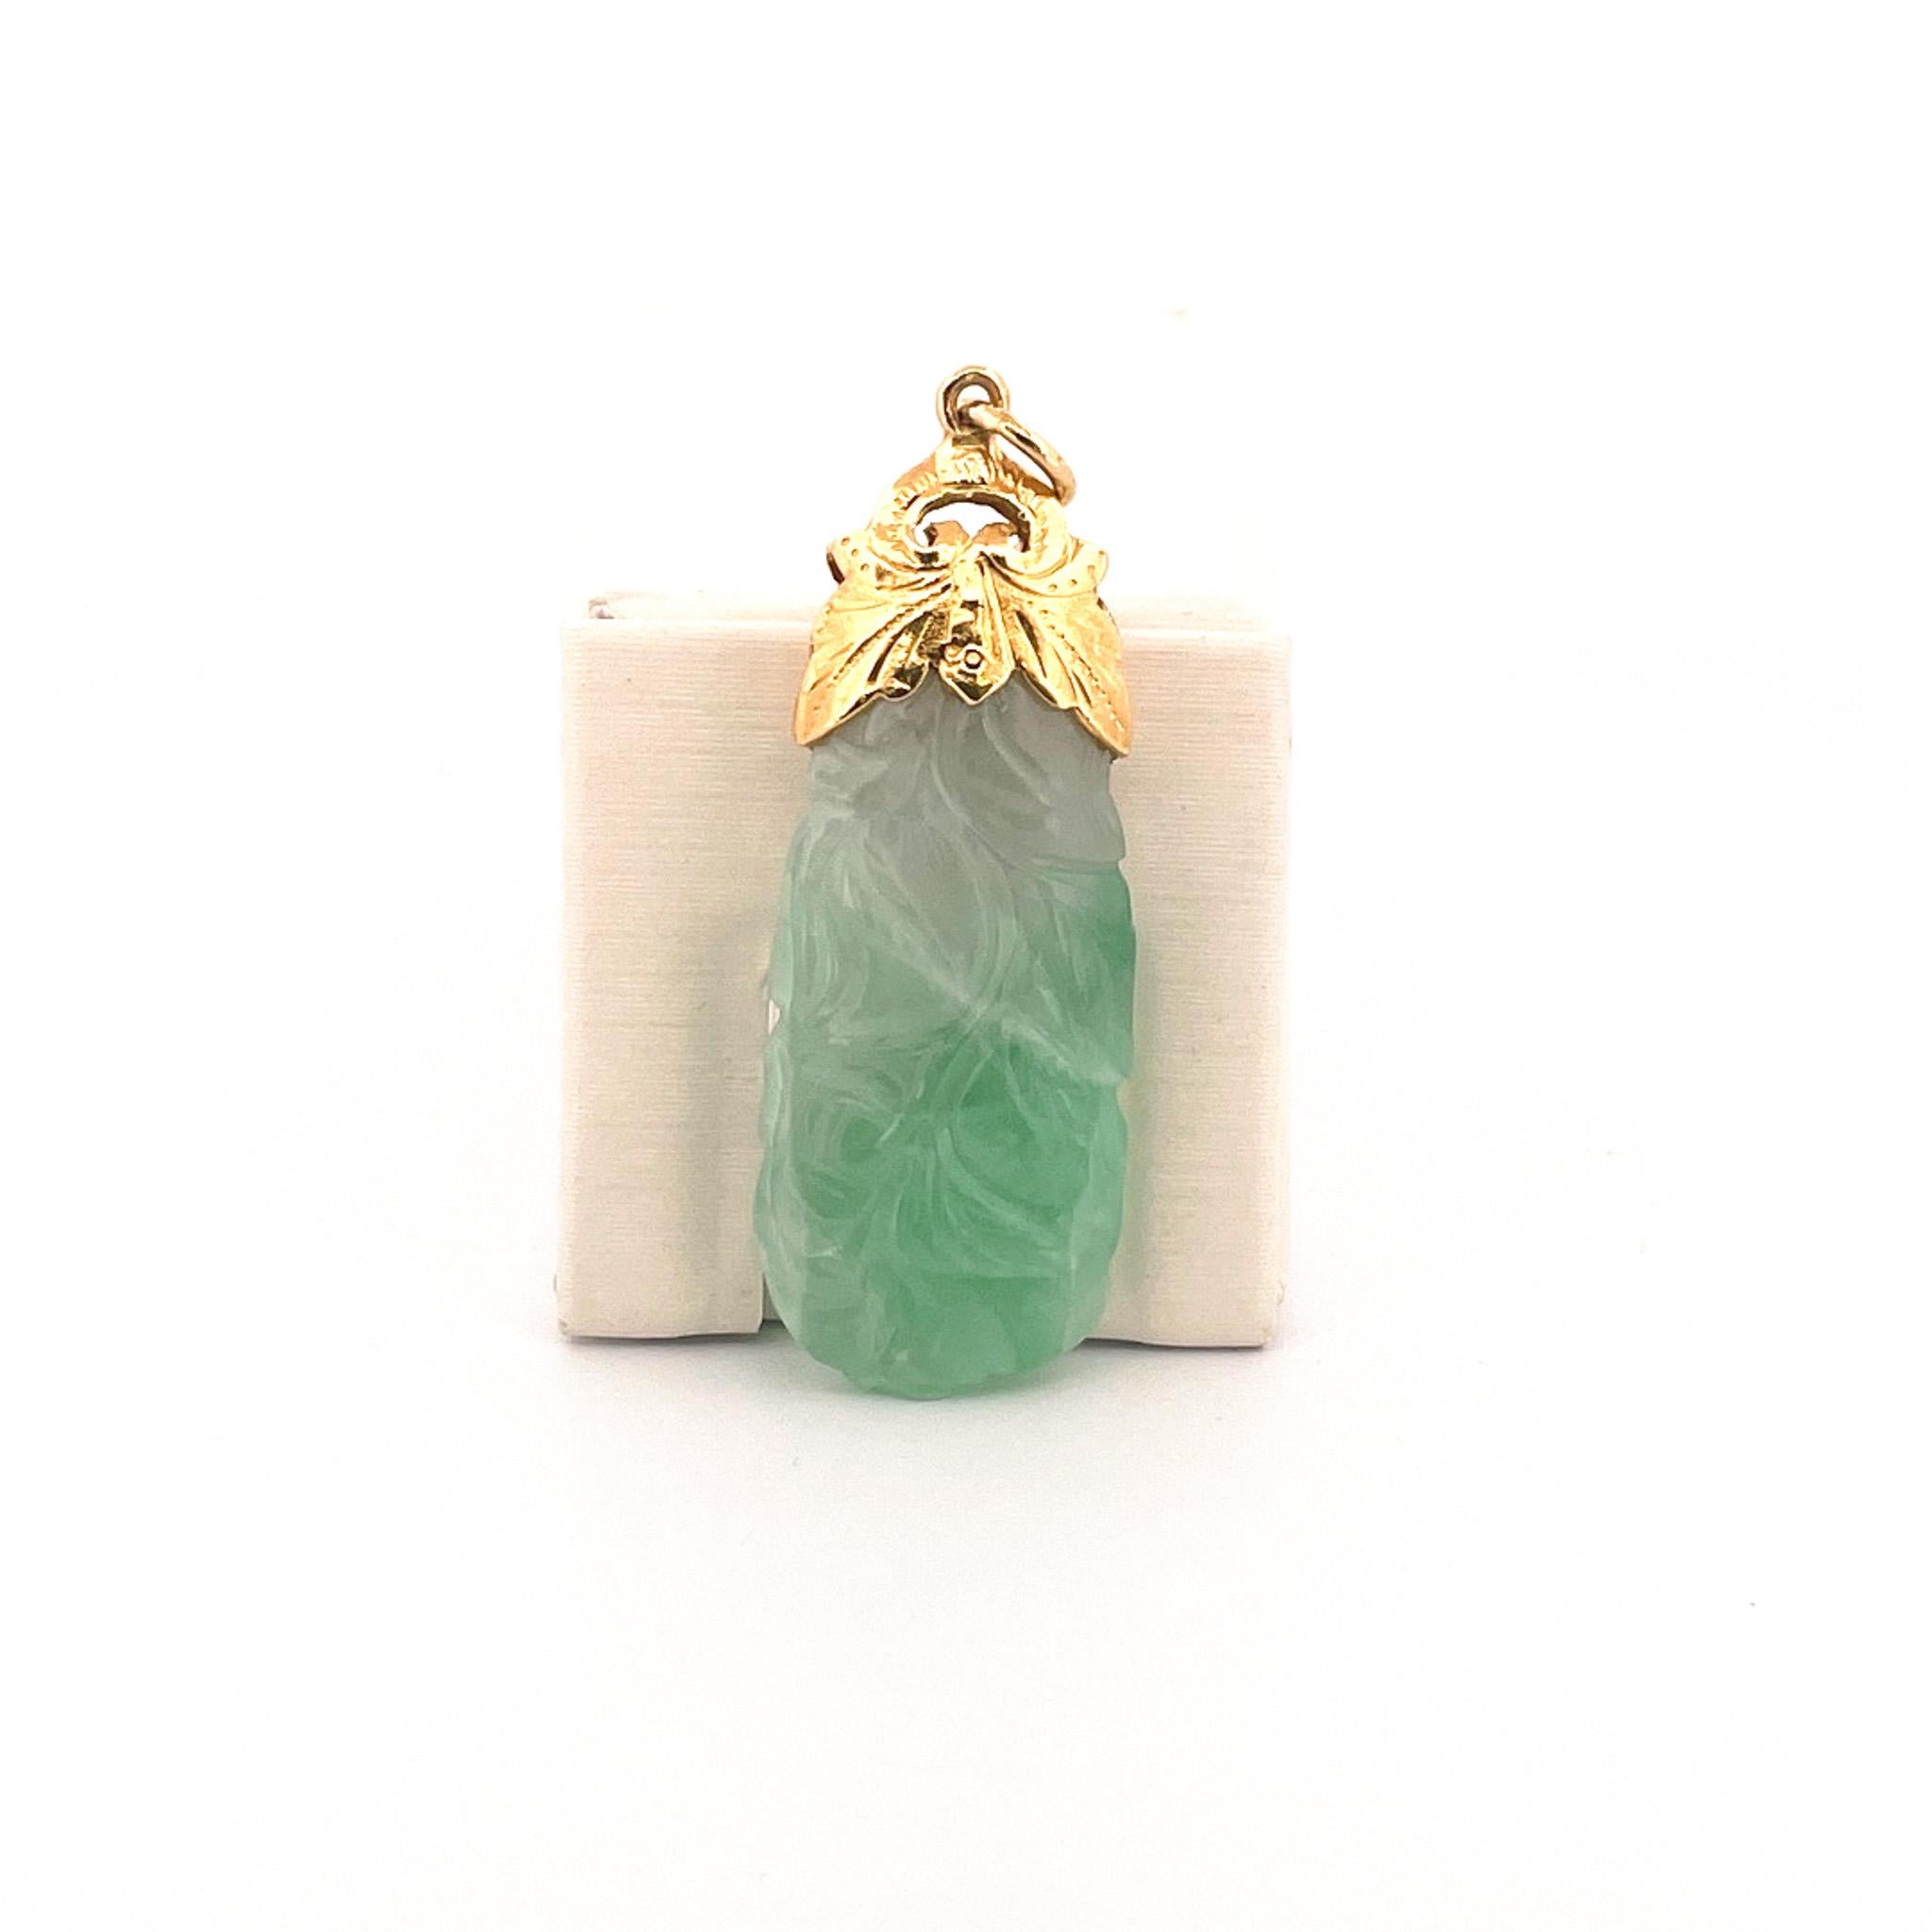 From the Eiseman Estate Jewelry Collection, circa 1970s, 24 karat yellow gold pendant featuring carved green jadeite. This pendant is crafted with a textured yellow bail and measures 54 x 18.35 x 7.14 mm.